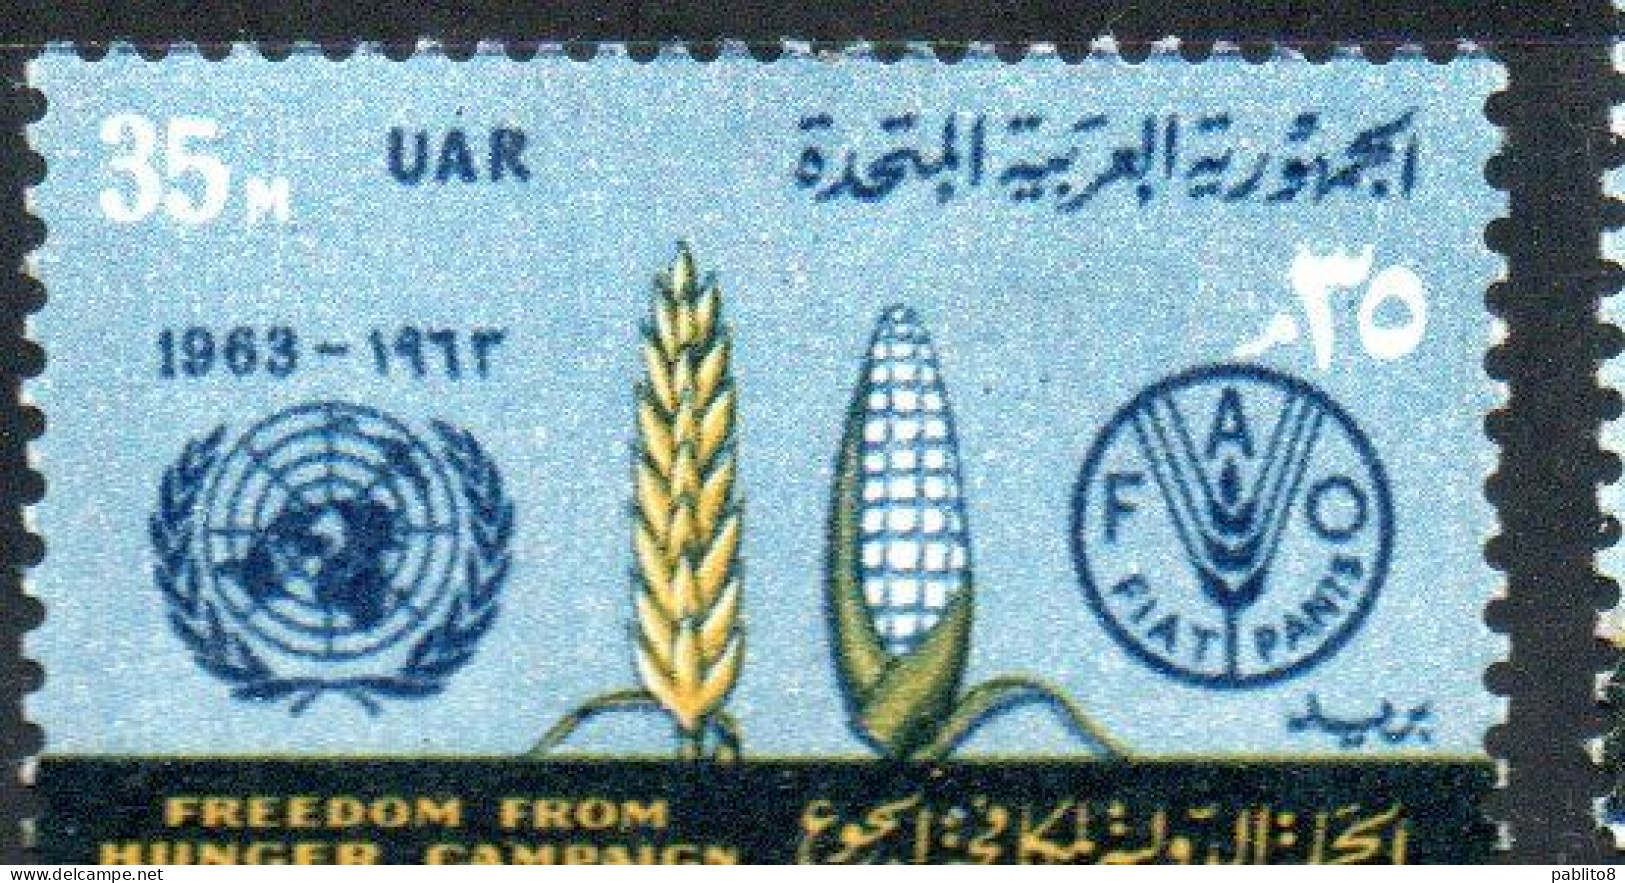 UAR EGYPT EGITTO 1963 FAO FREEDOM FROM HUNGER CAMPAIGN WHEAT CORN AND EMBLEMS 35m MH - Nuevos